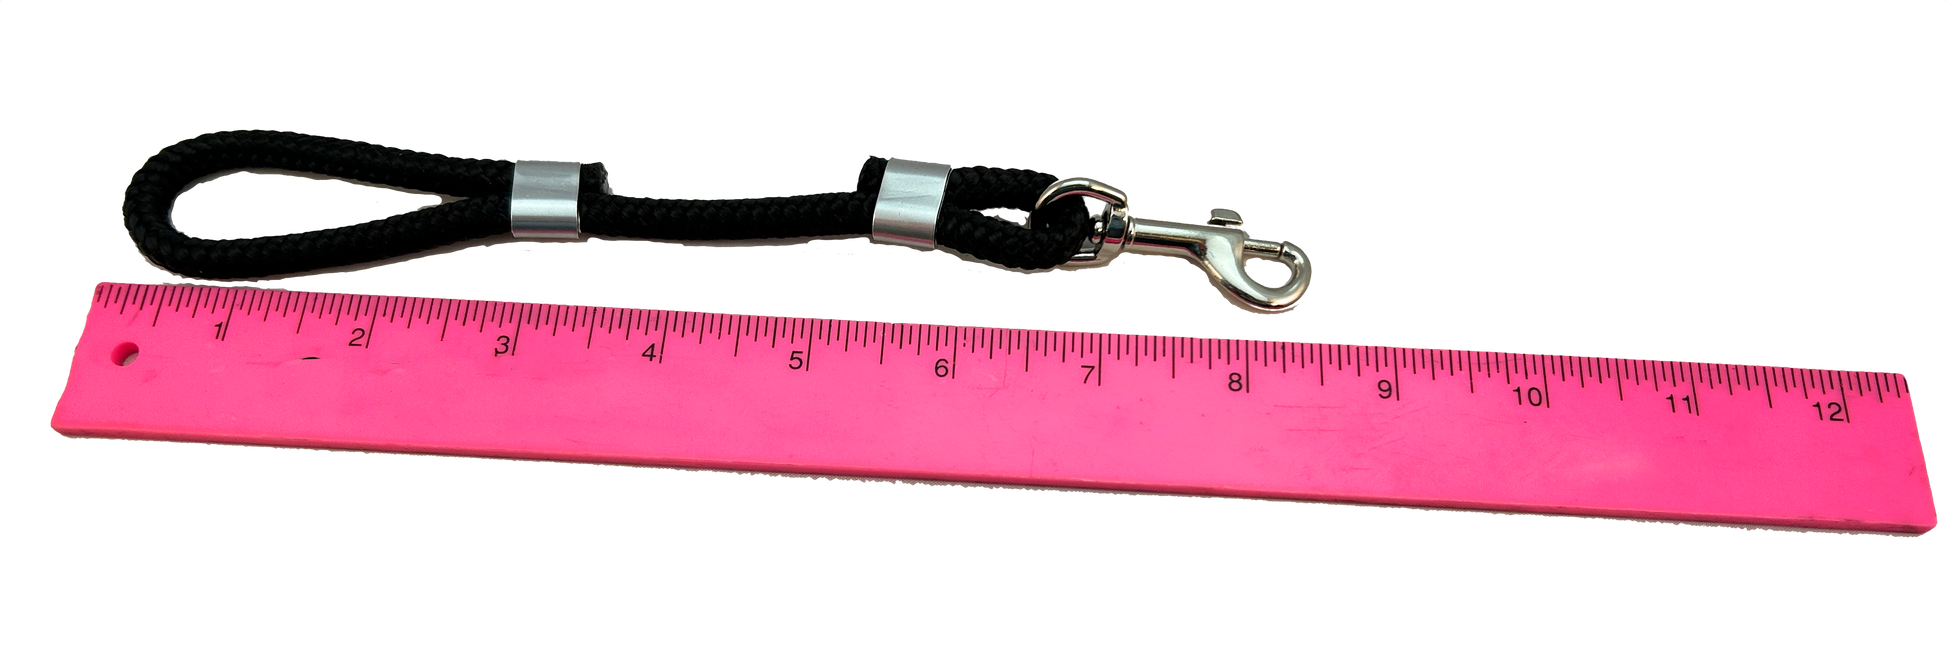 when not attached, short safety strap is about 8 inches long